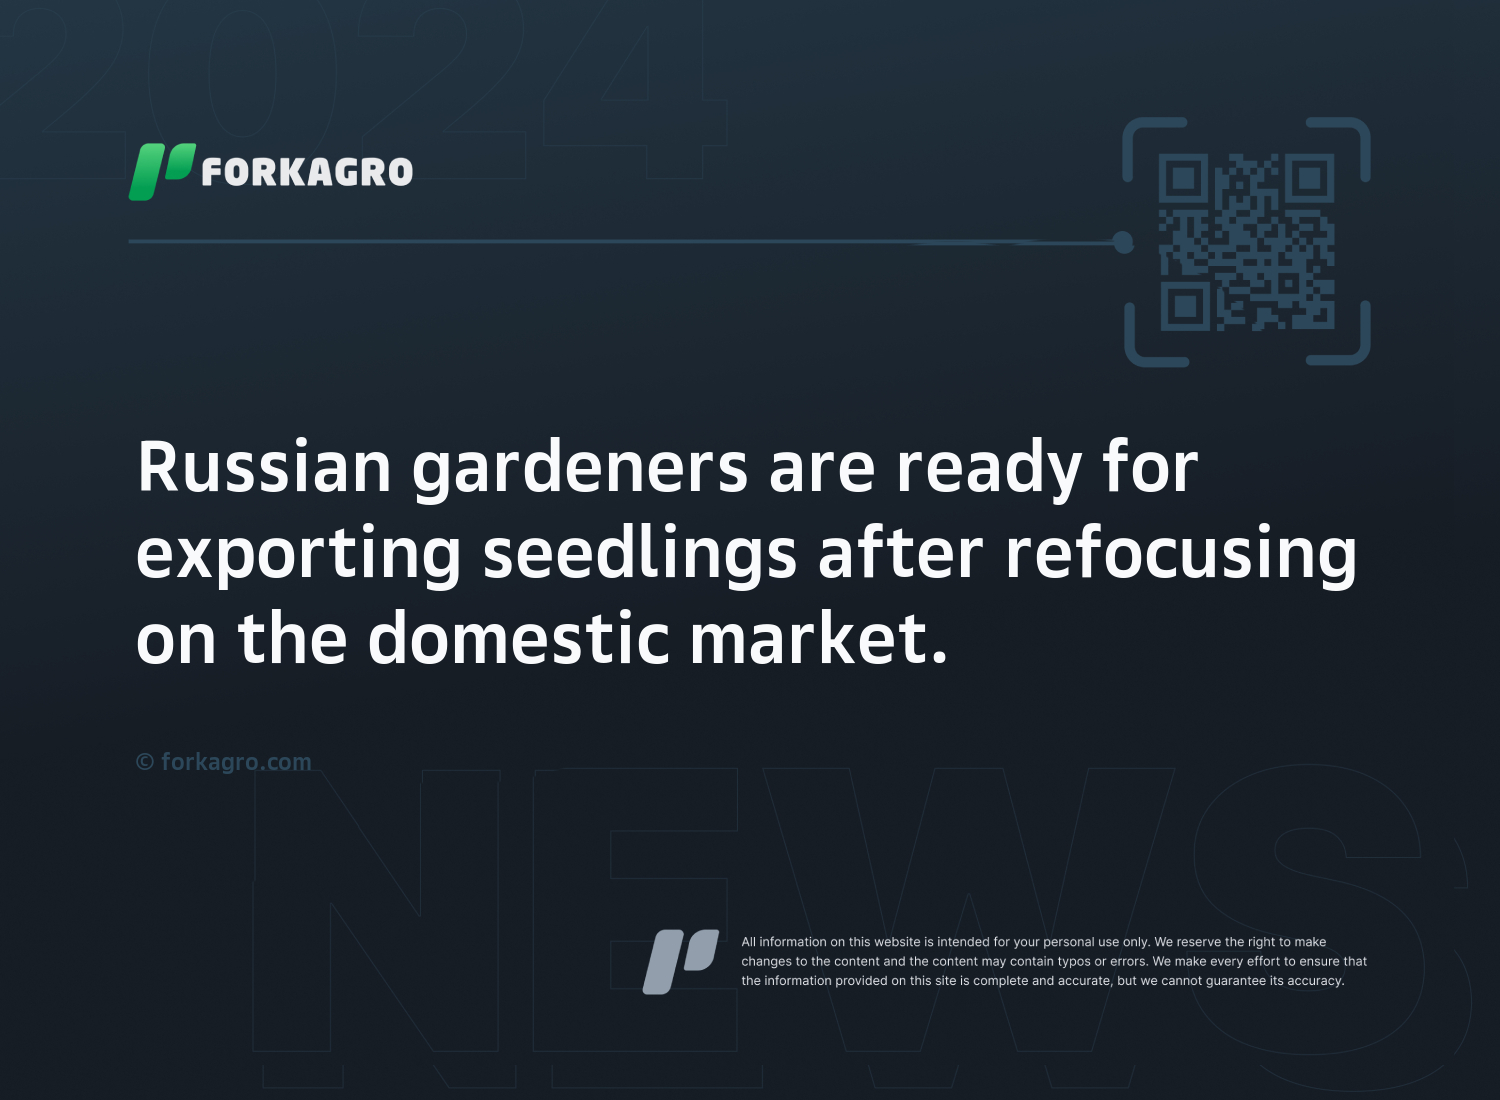 Russian gardeners are ready for exporting seedlings after refocusing on the domestic market.